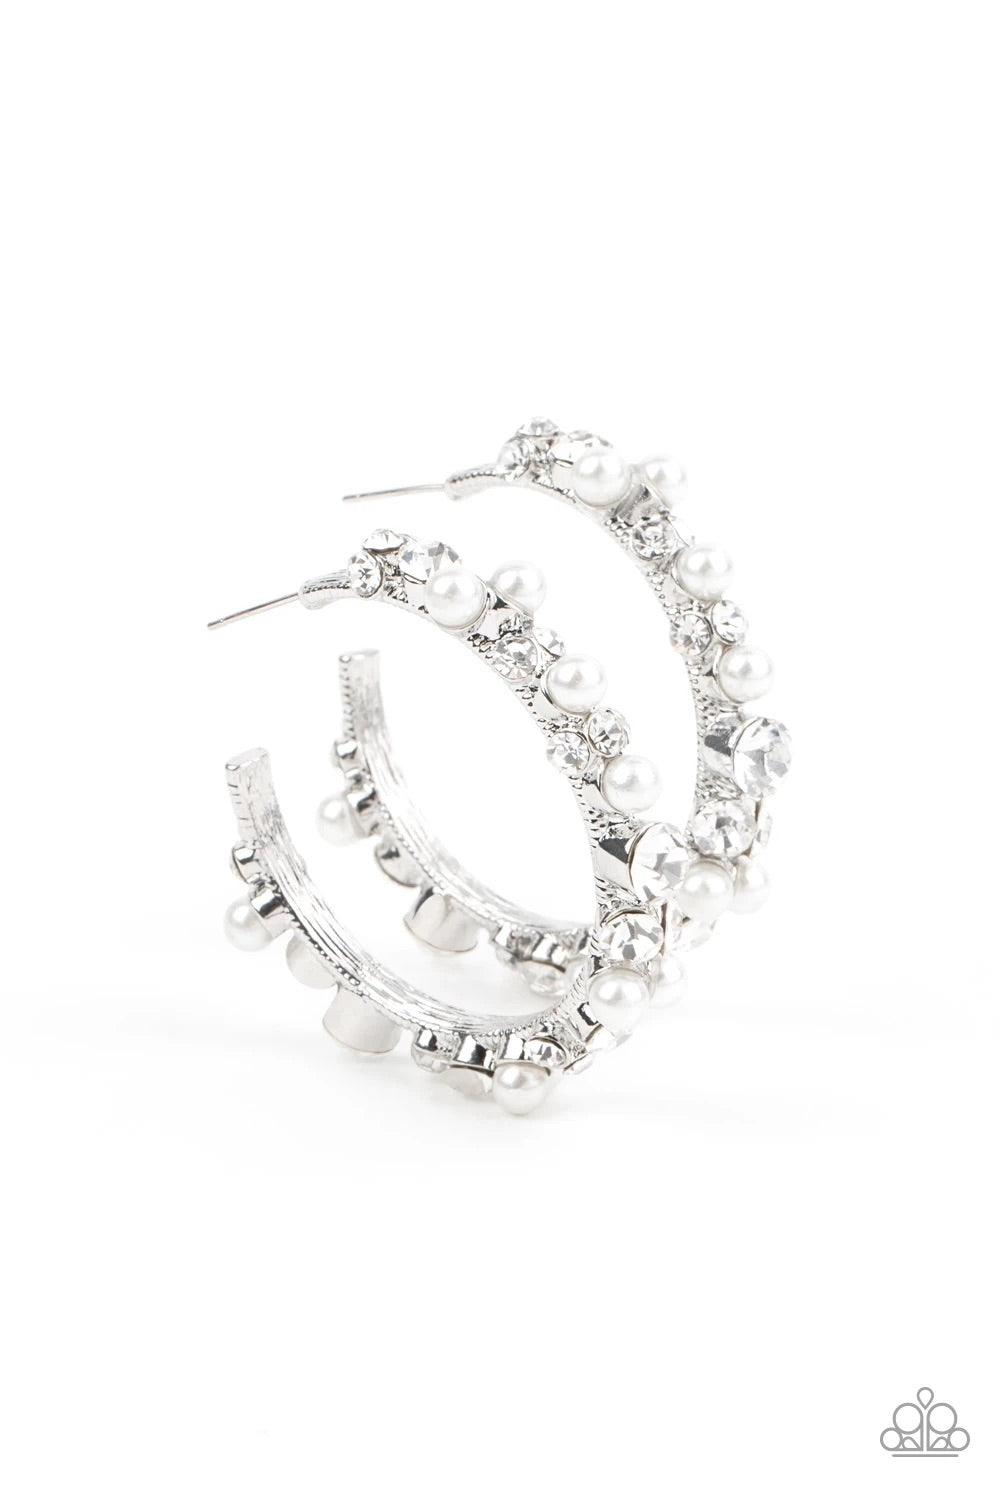 Paparazzi Accessories Let There Be Socialite - White A bubbly array of classic white rhinestones and glassy white rhinestones are encrusted along the front of a silver hoop, creating an elegantly effervescent look. Earring attaches to a standard post fitt